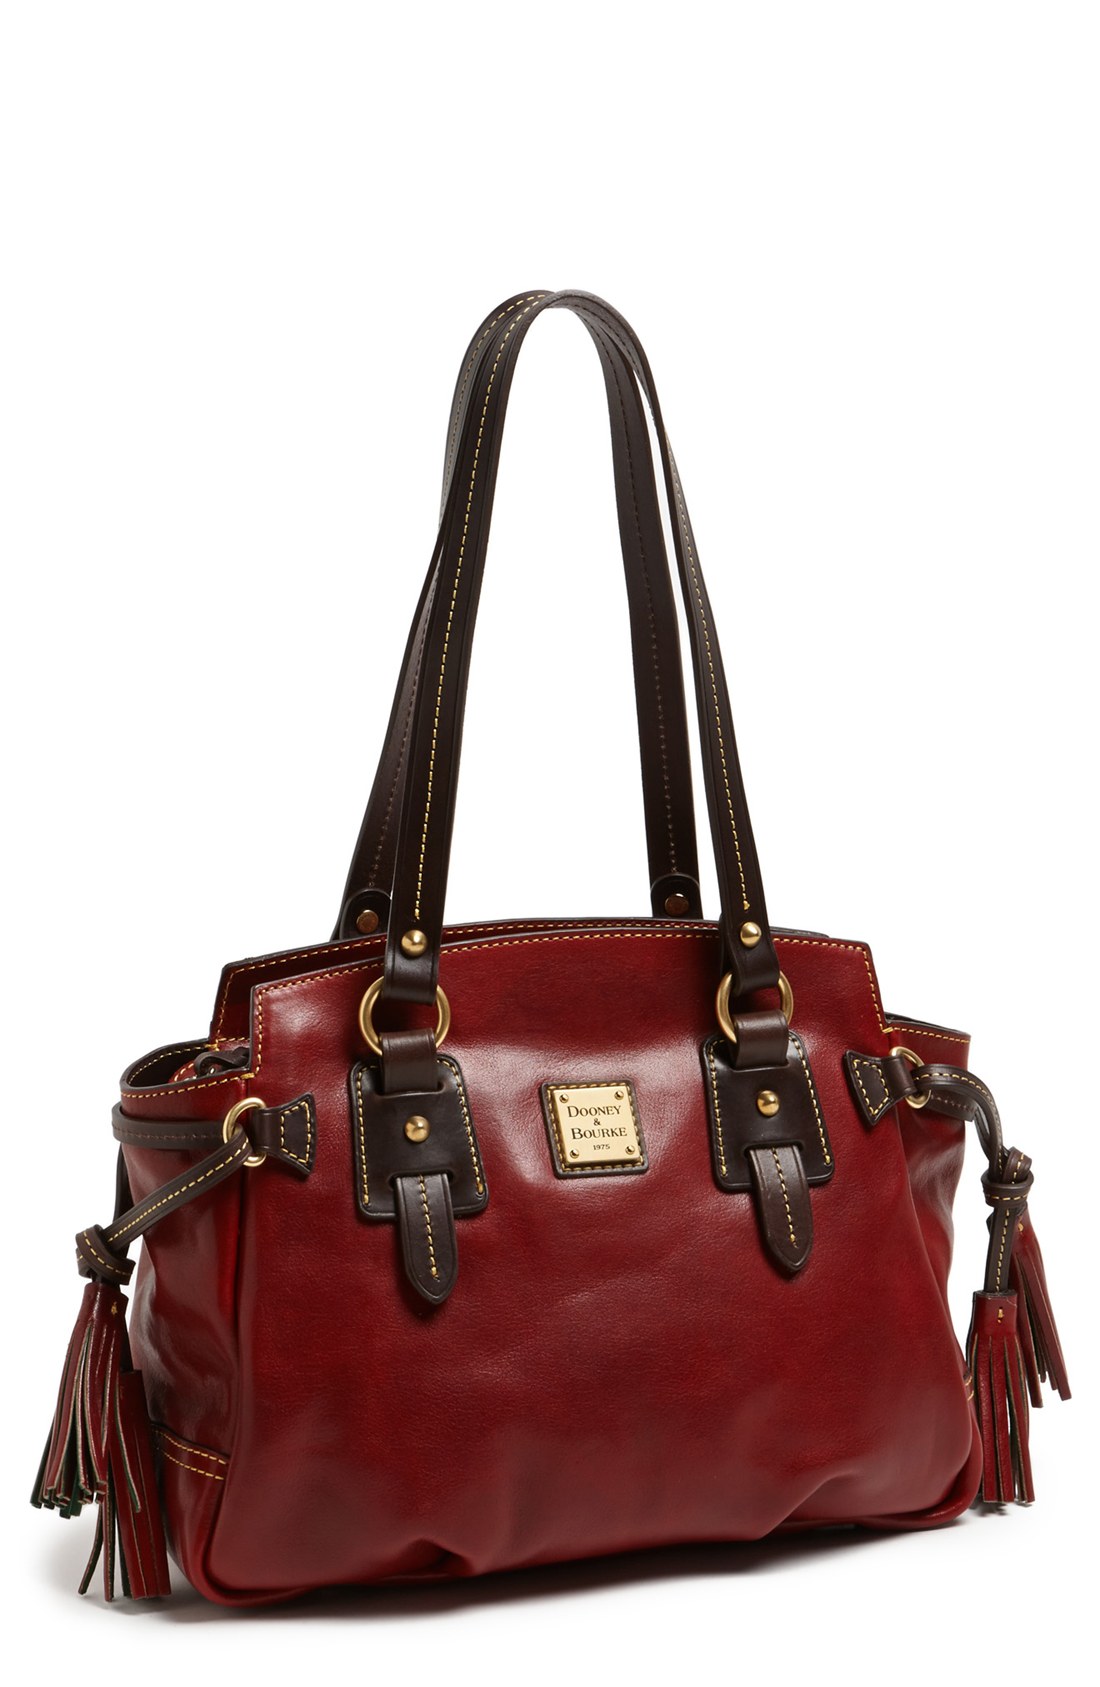 Dooney & Bourke Winged Small Leather Handbag in Brown (Rouge) | Lyst